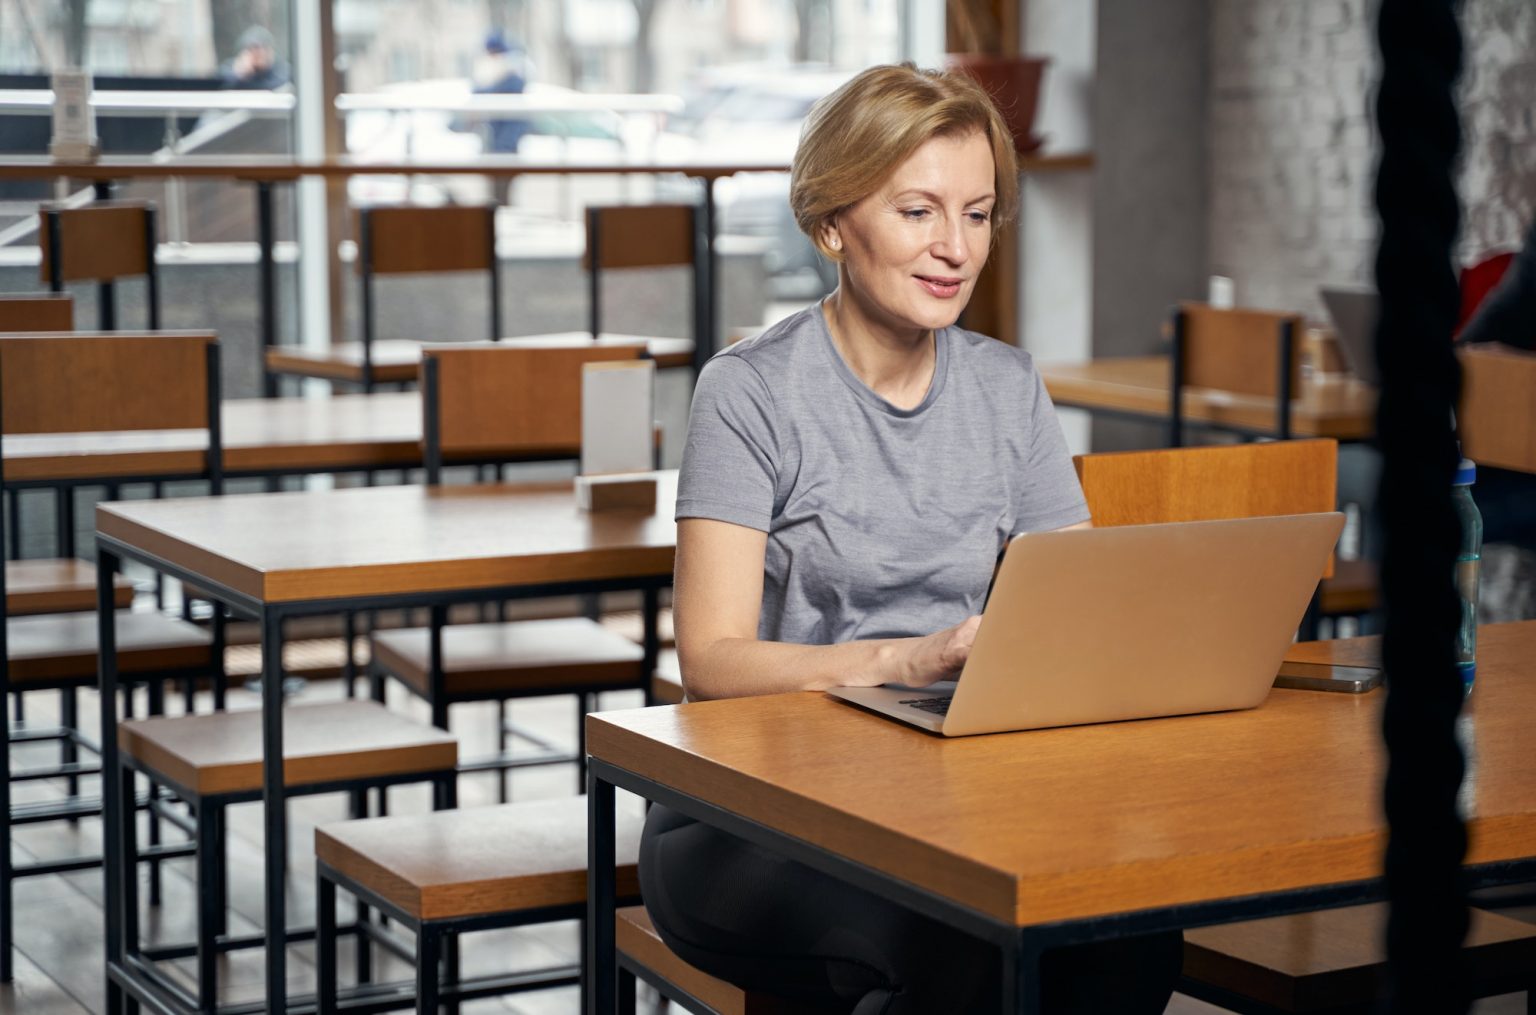 Woman working on modem laptop in cafeteria